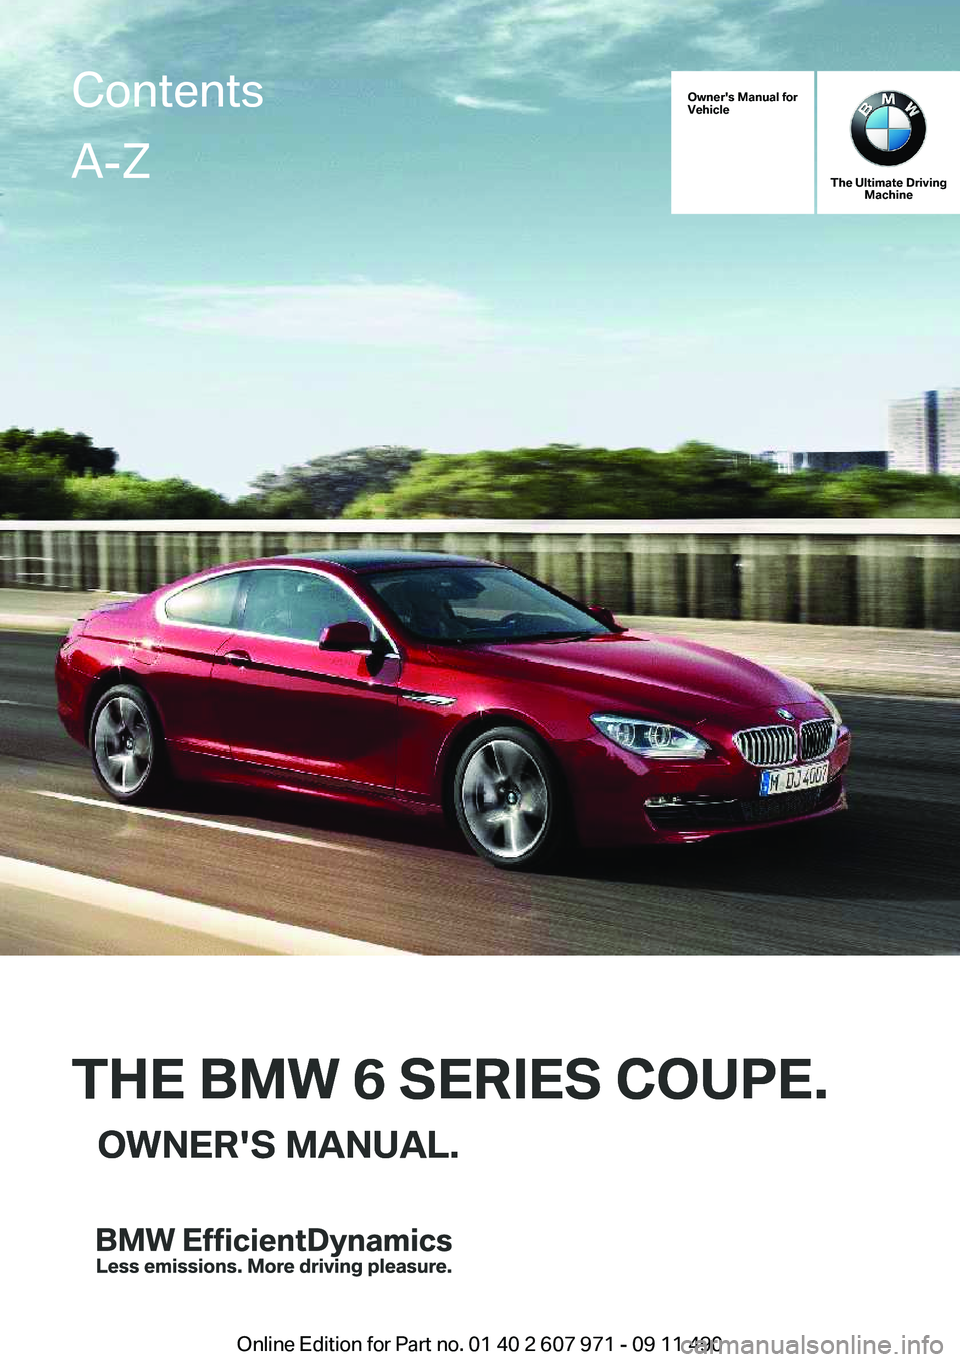 BMW 650I XDRIVE COUPE 2012  Owners Manual Owner's Manual for
Vehicle
THE BMW 6 SERIES COUPE.OWNER'S MANUAL.
The Ultimate Driving Machine
THE BMW 6 SERIES COUPE.OWNER'S MANUAL.
ContentsA-Z
Online Edition for Part no. 01 40 2 607 97